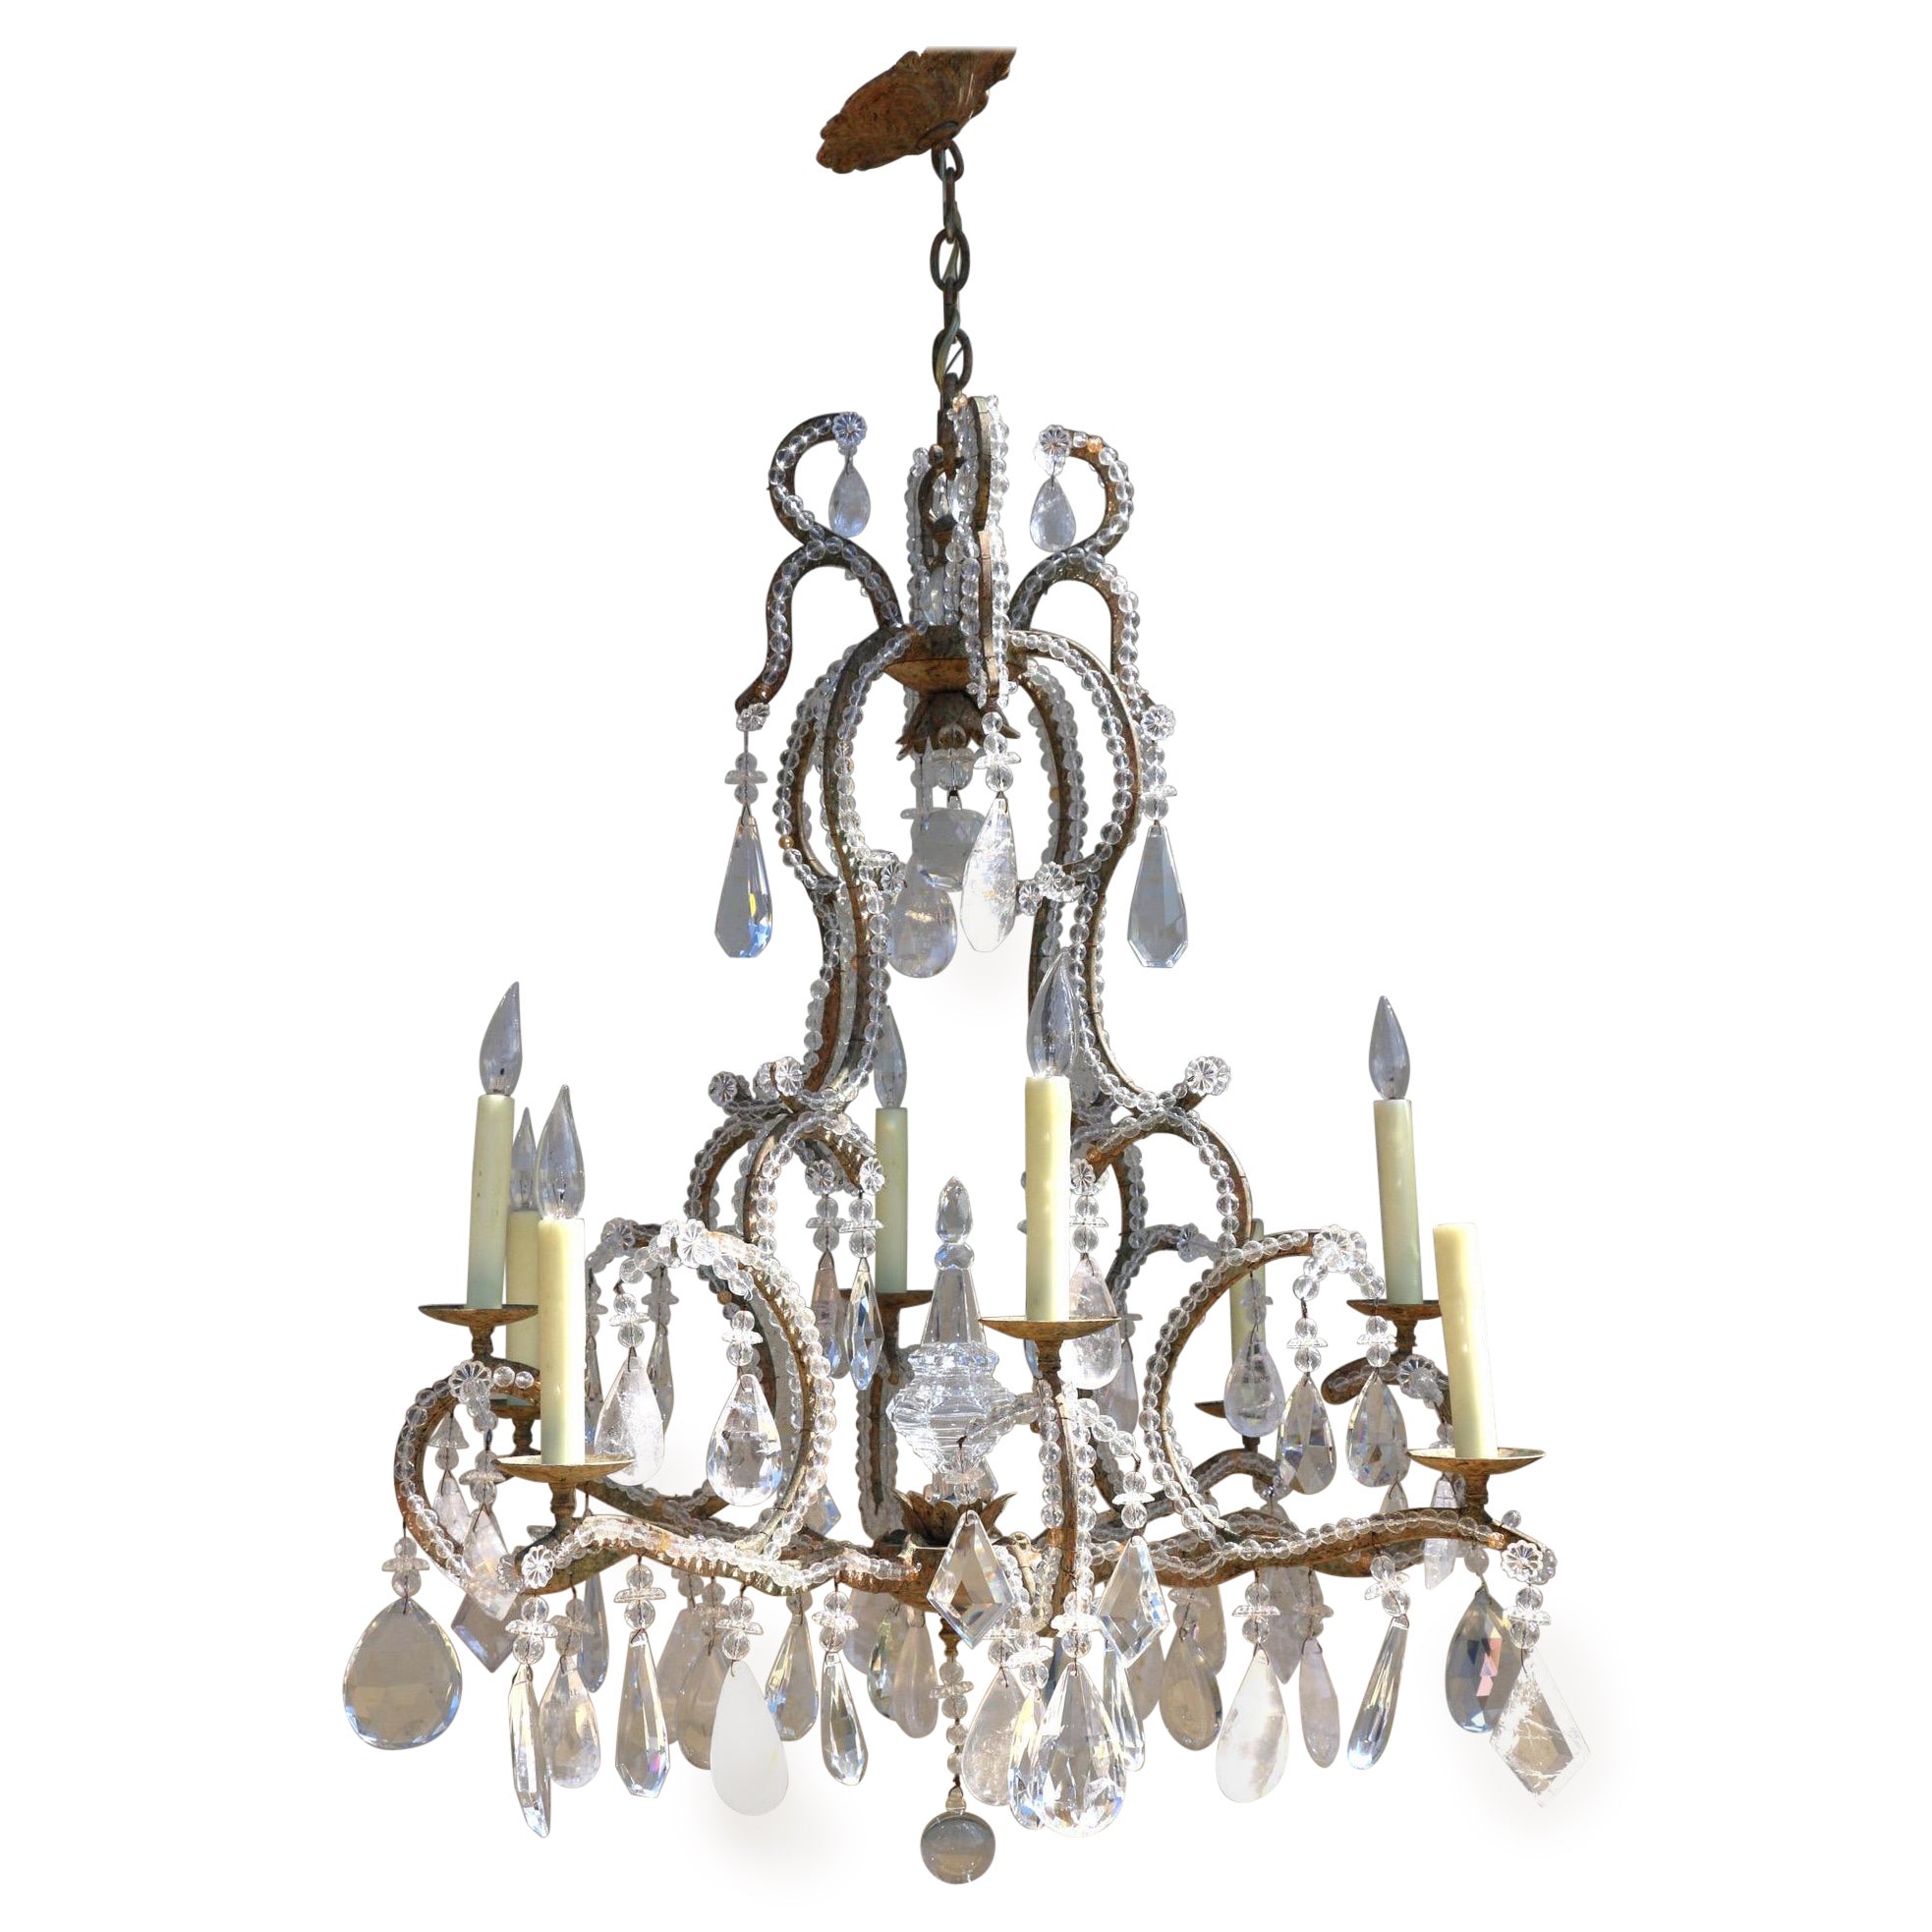 Mid 20th Century Rock Crystal Eight Light Chandelier For Sale